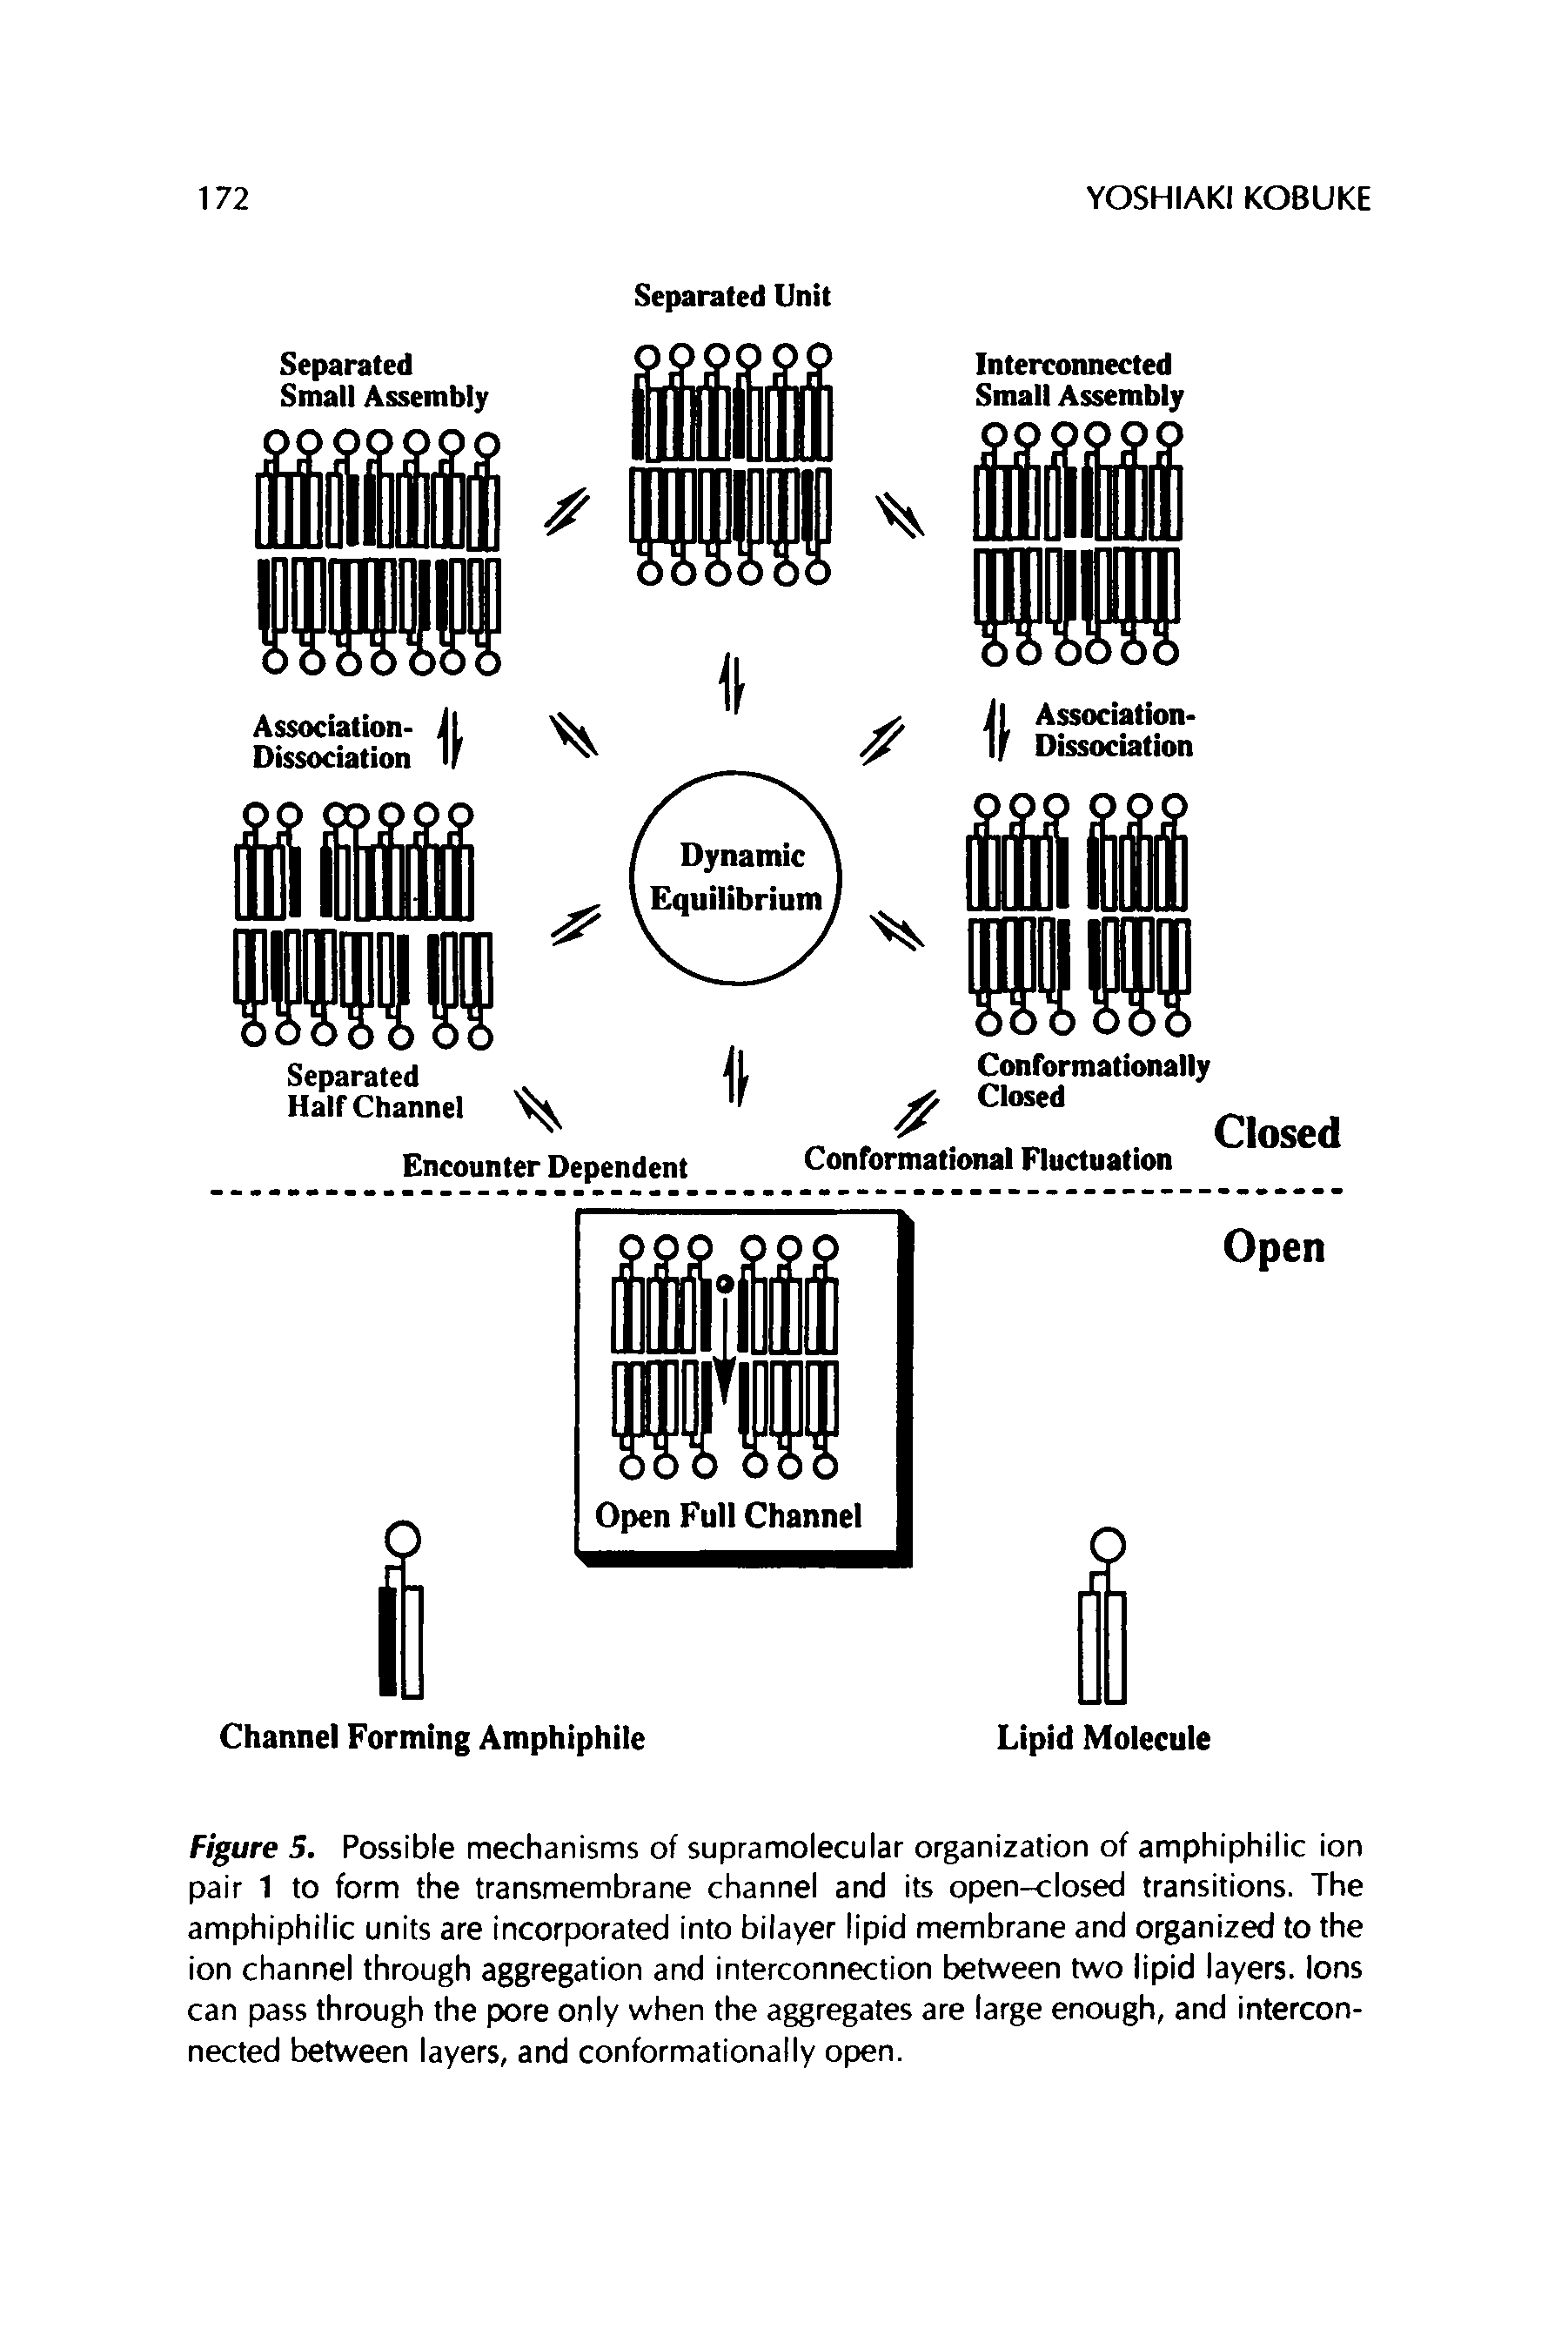 Figure 5. Possible mechanisms of supramolecular organization of amphiphilic ion pair 1 to form the transmembrane channel and its open-closed transitions. The amphiphilic units are incorporated into bilayer lipid membrane and organized to the ion channel through aggregation and interconnection between two lipid layers. Ions can pass through the pore only when the aggregates are large enough, and interconnected between layers, and conformationally open.